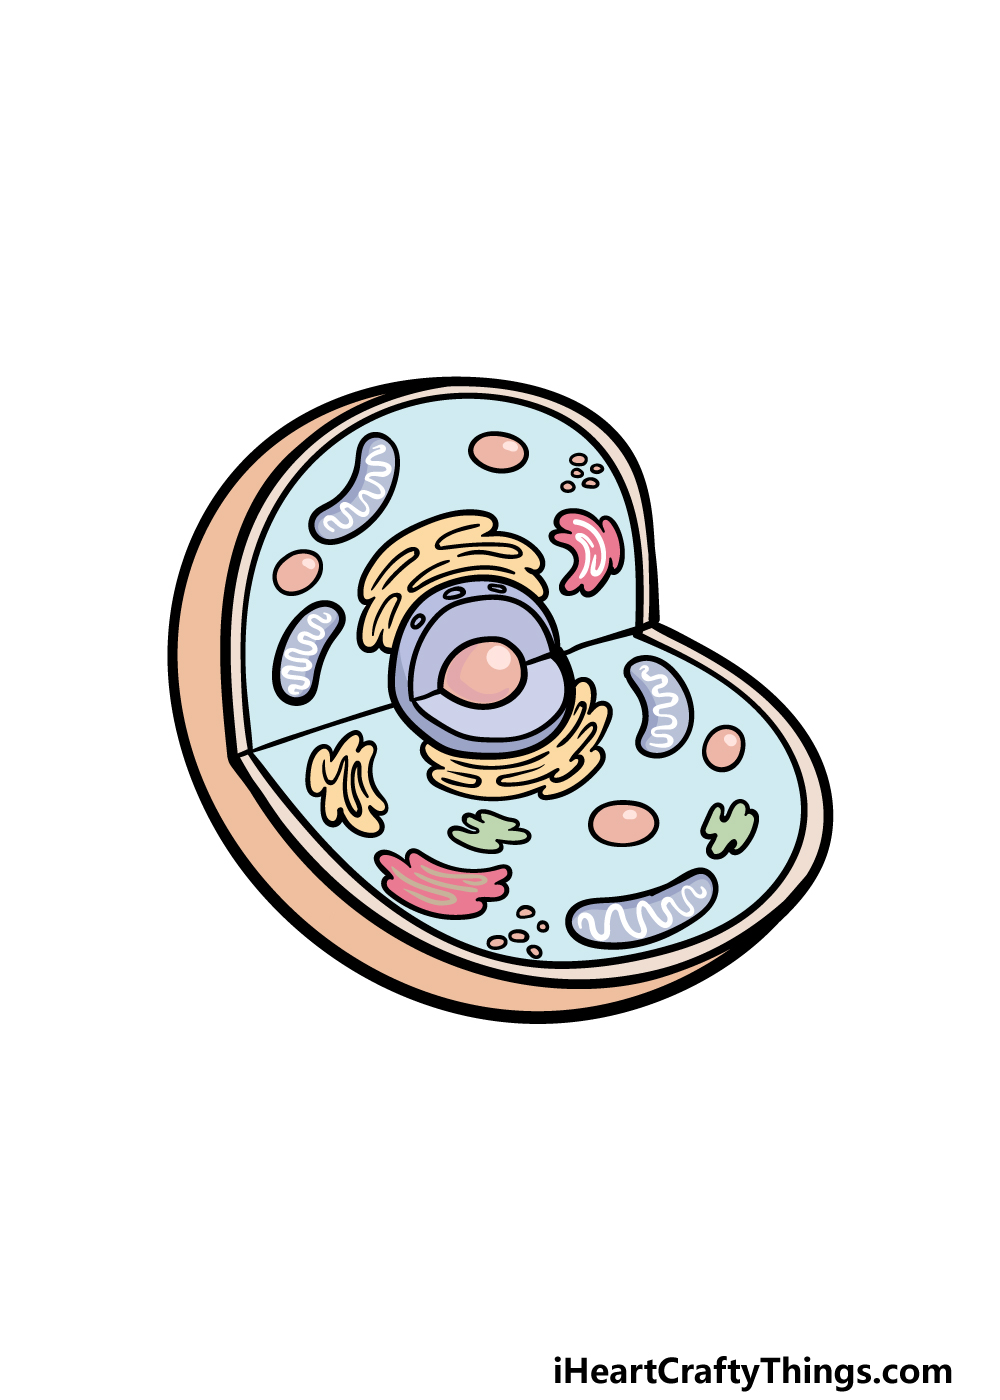 How To Draw An Animal Cell – A Step by Step Guide